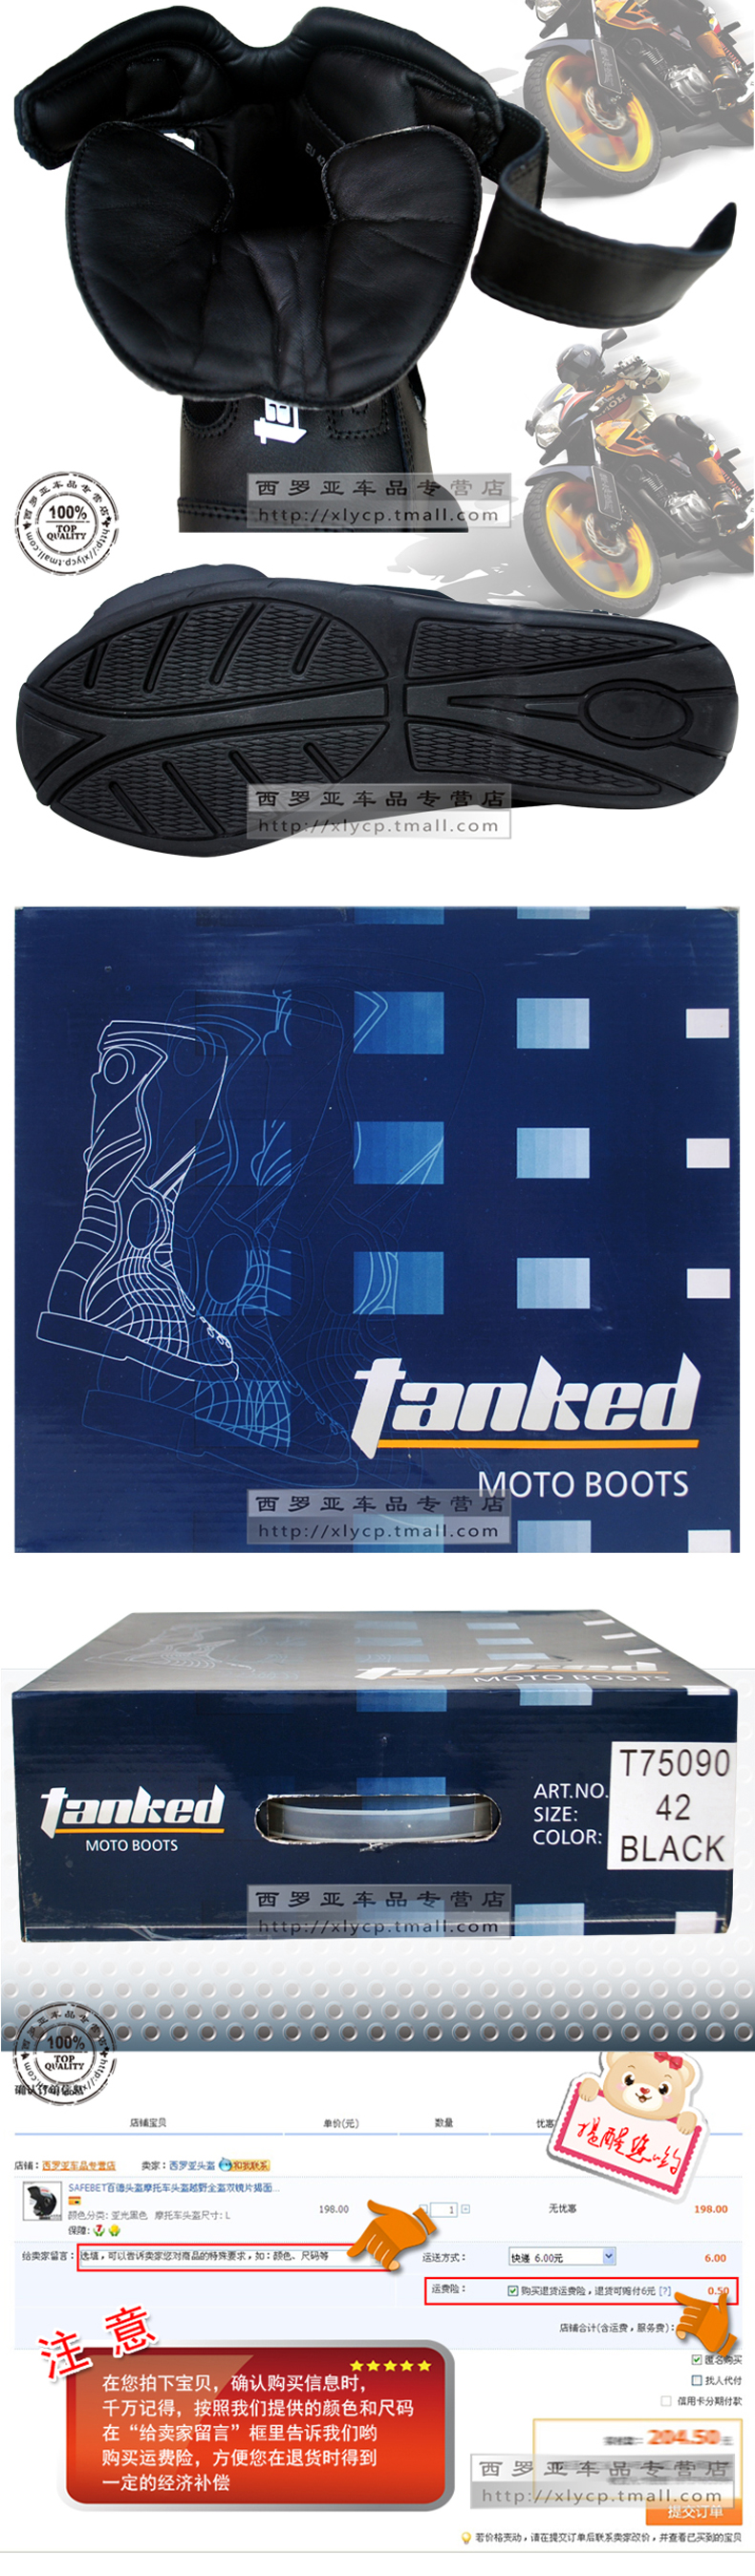 Chaussures moto TANKED RACING T75090 - Ref 1394186 Image 20